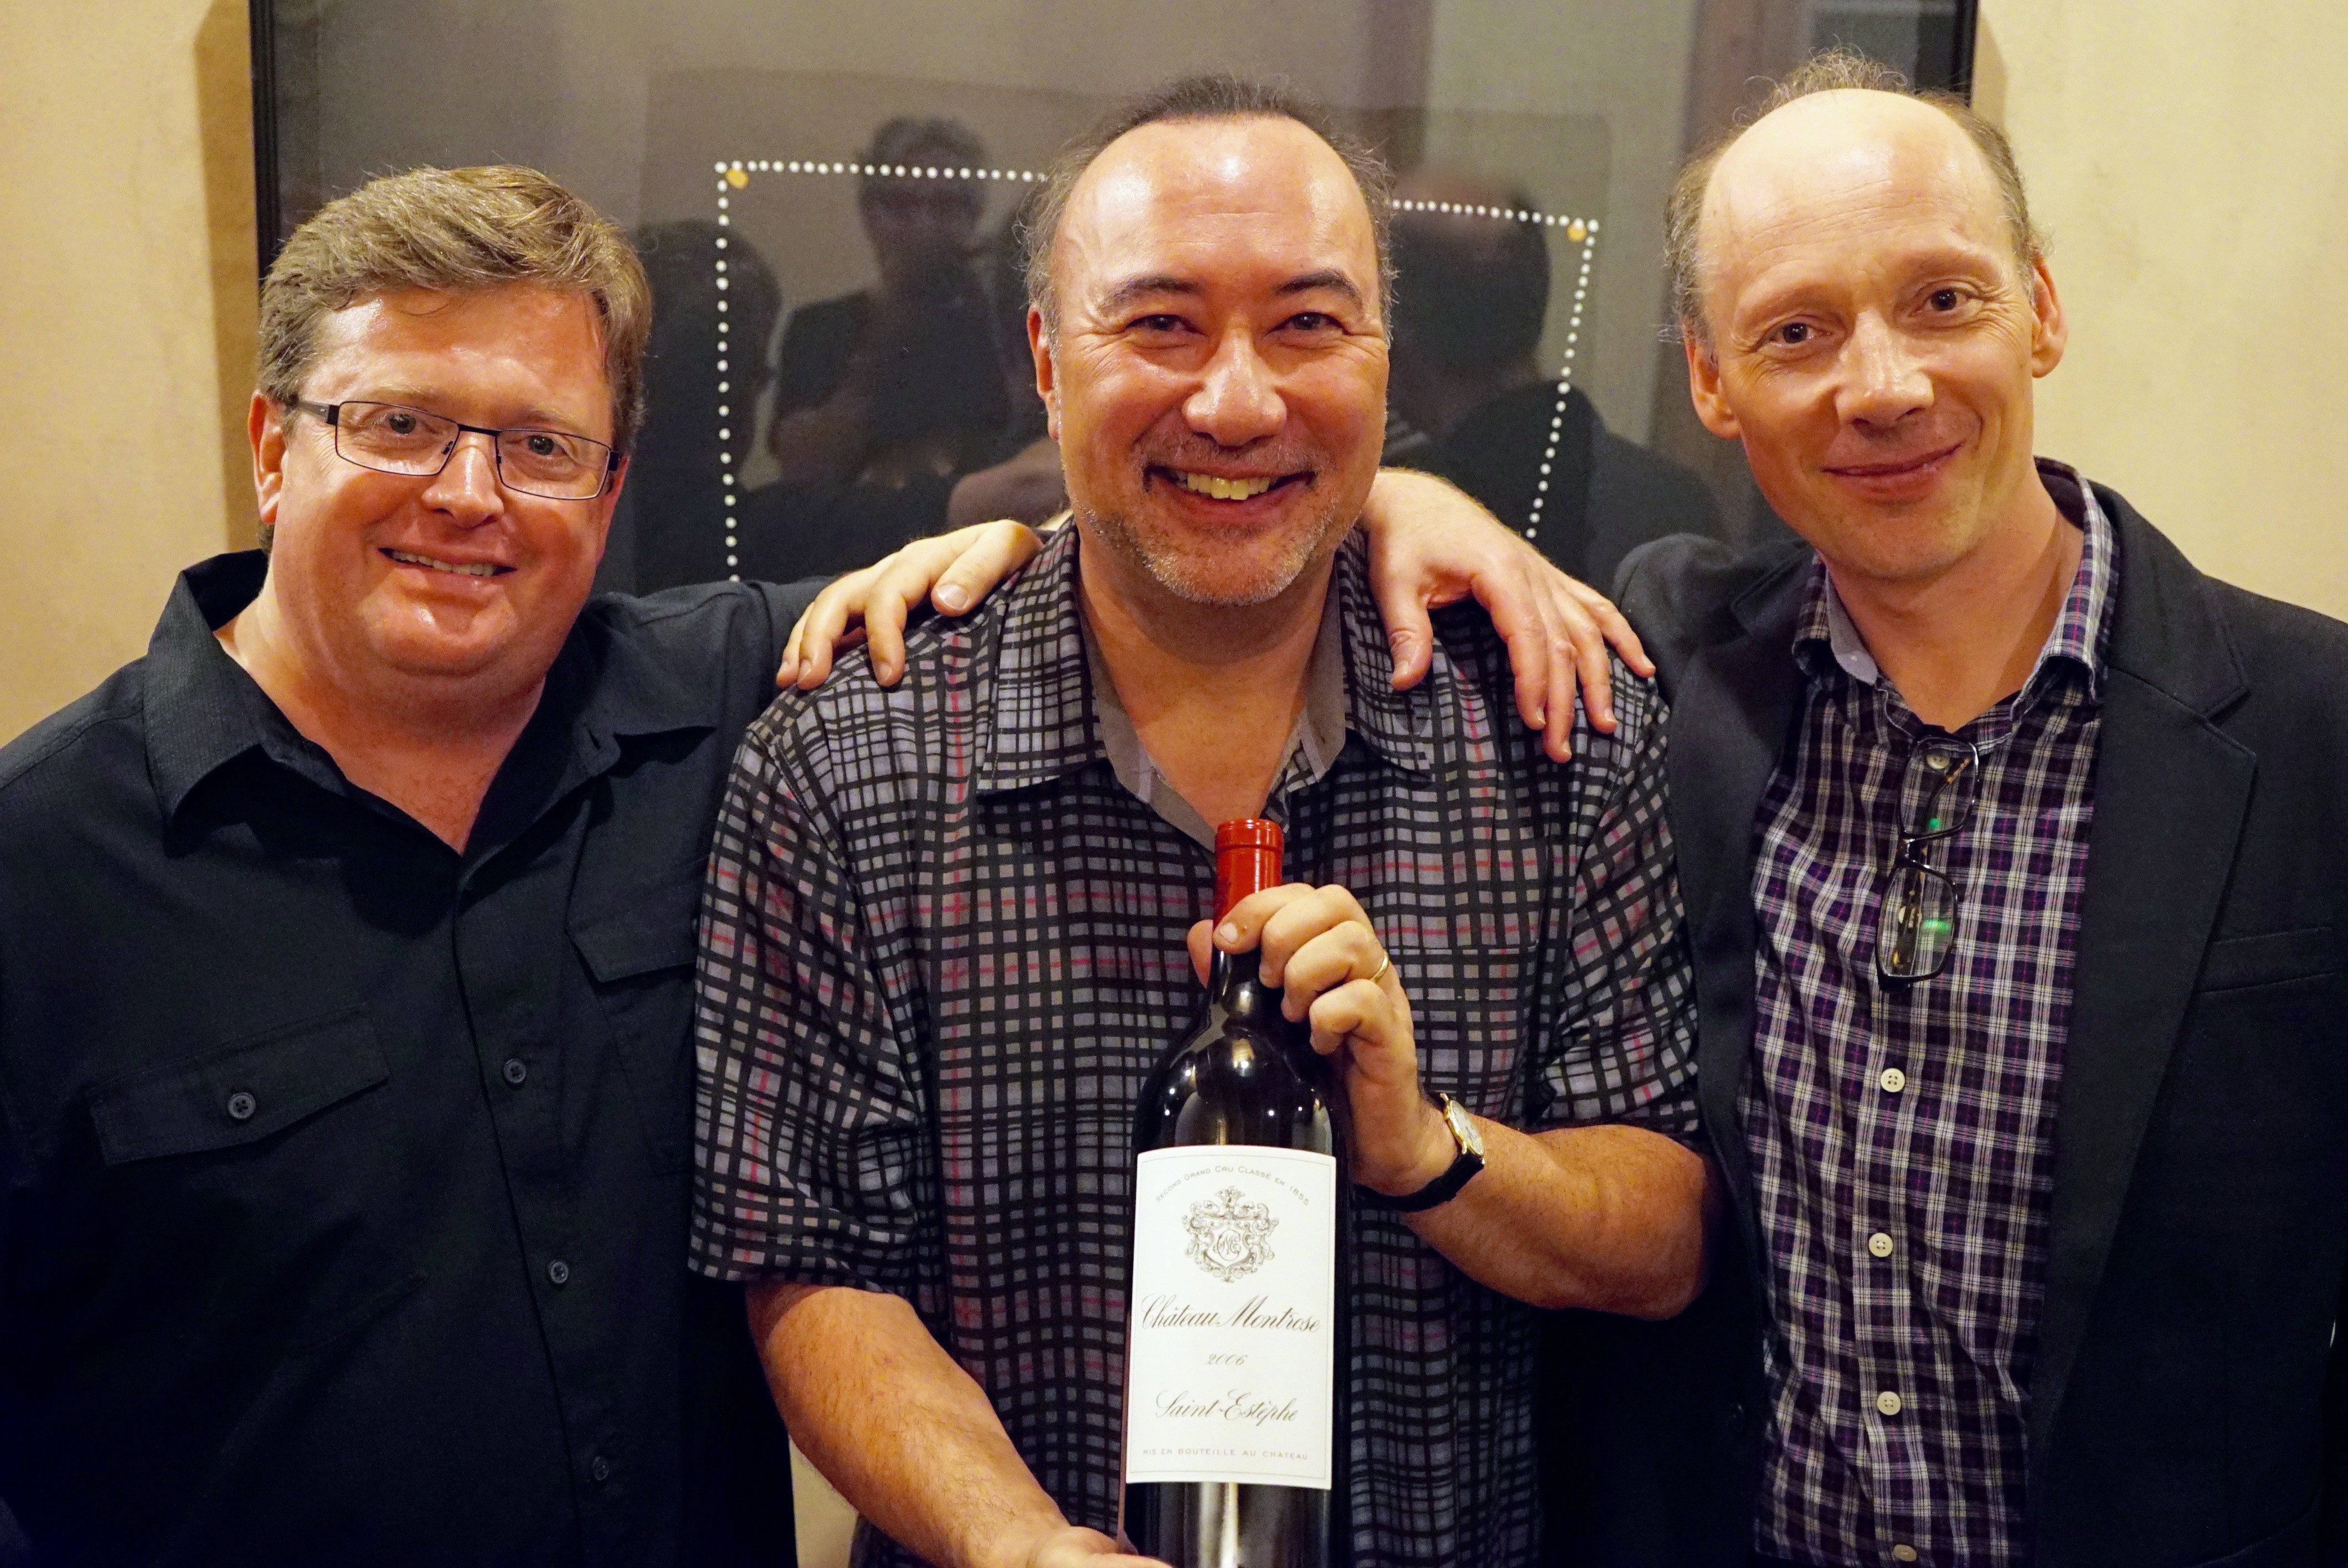 Martin Beaver, Jon Kimora Parker and Clive Greensmith with a bottle of their favorite wine, Chateau Montrose